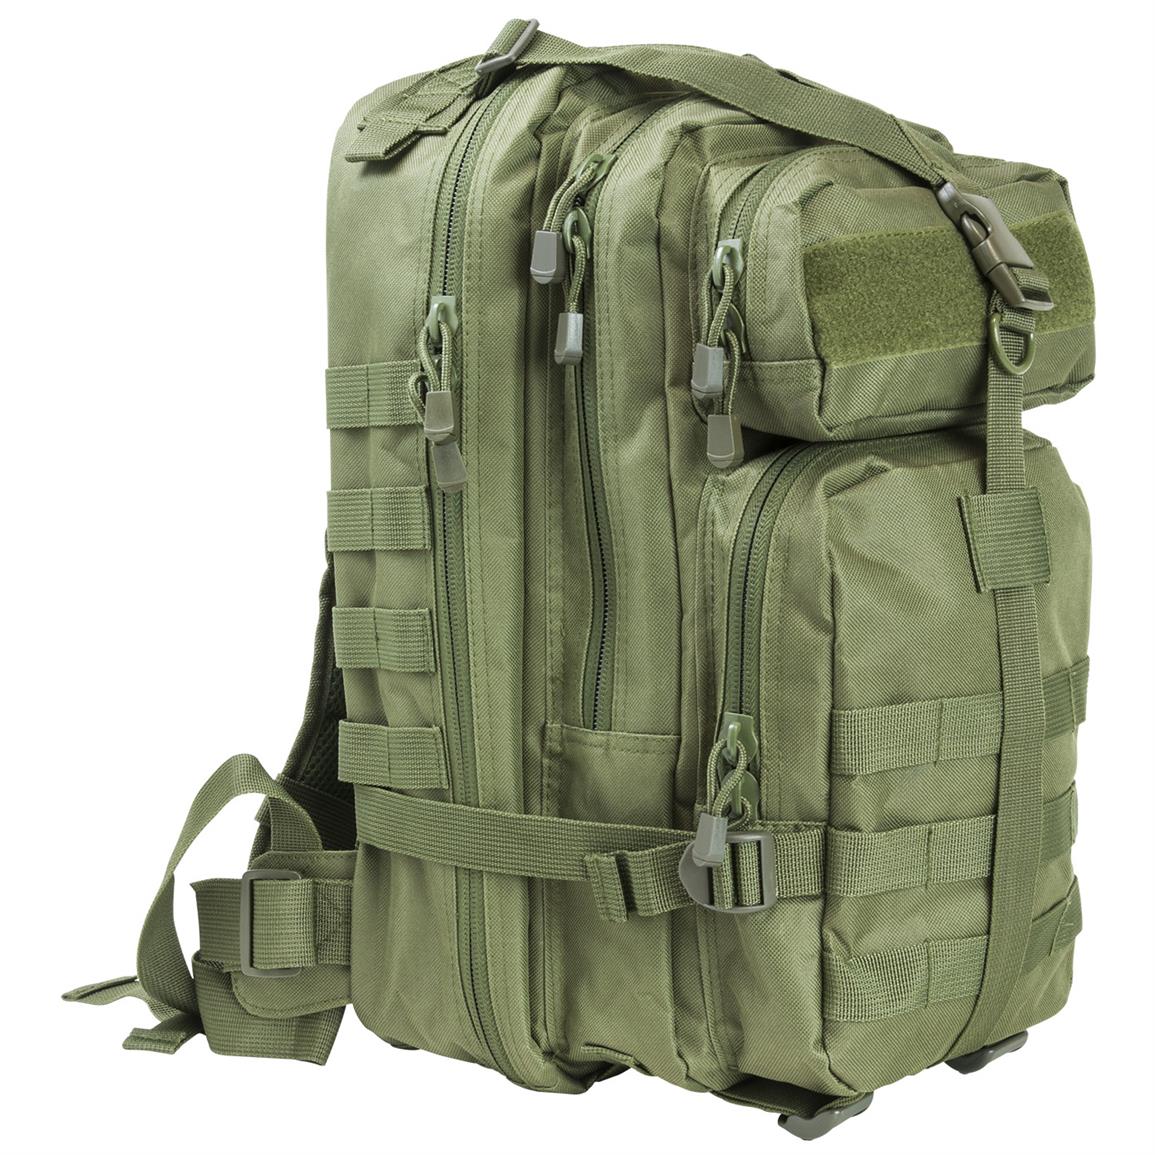 VISM by NcSTAR Small Backpack - 613599, Military Style Backpacks & Bags ...